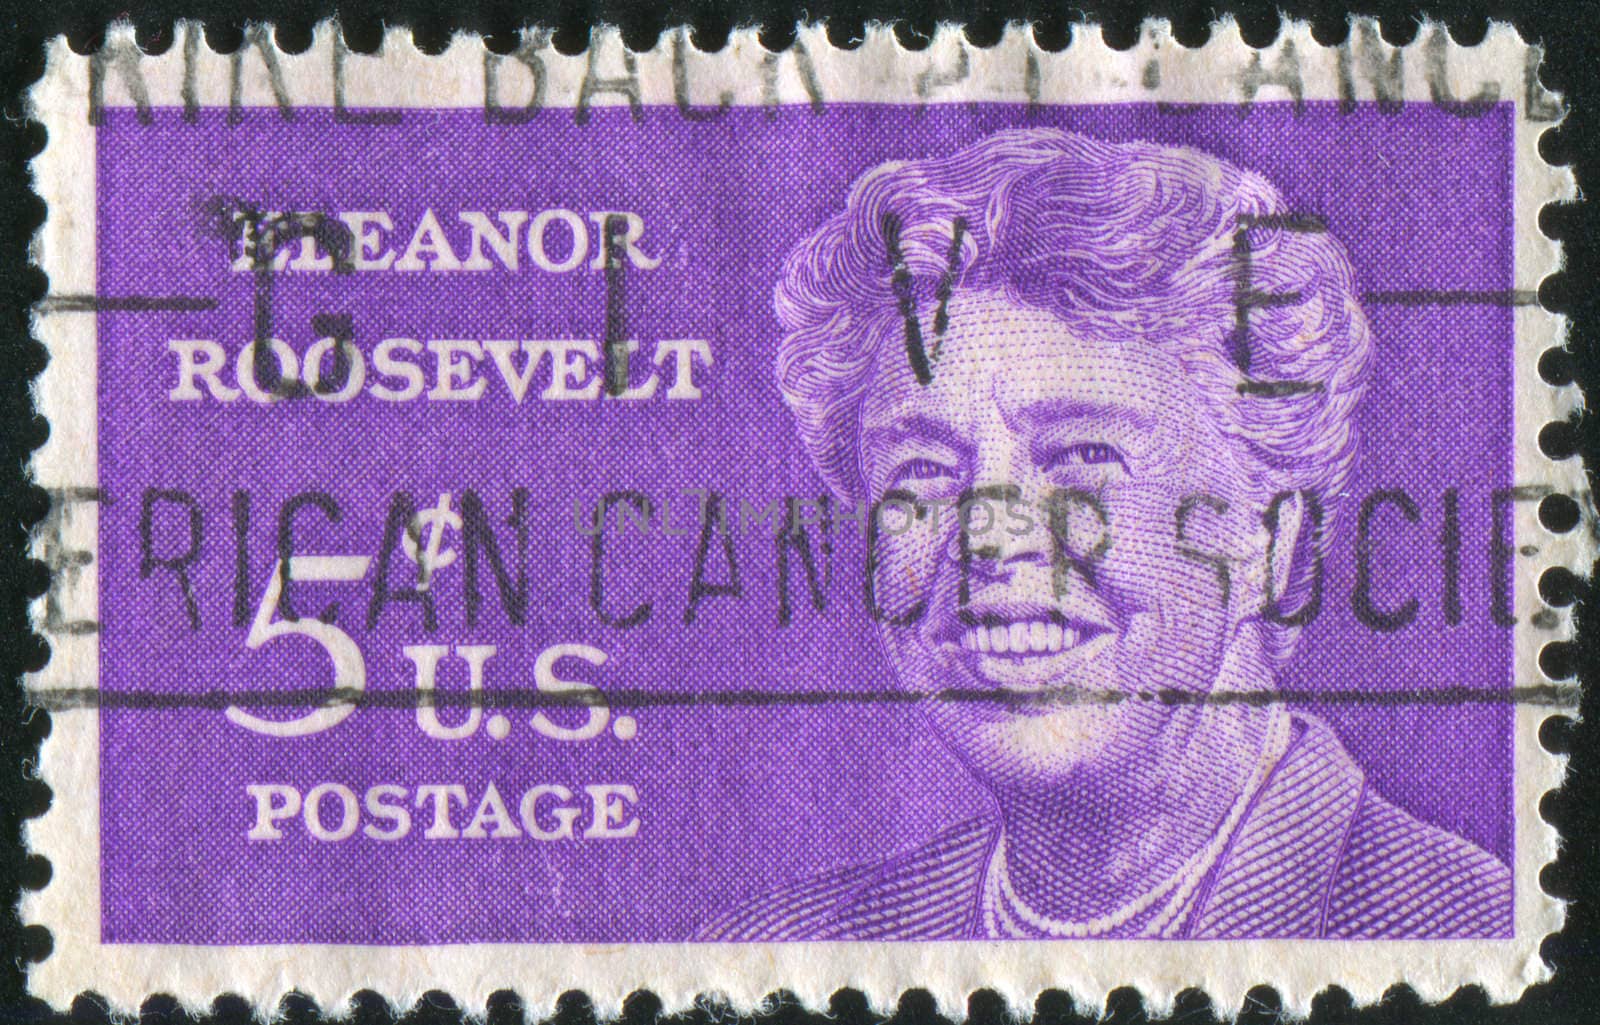 UNITED STATES - CIRCA 1963: stamp printed by United states, shows Eleanor Roosevelt, circa 1963